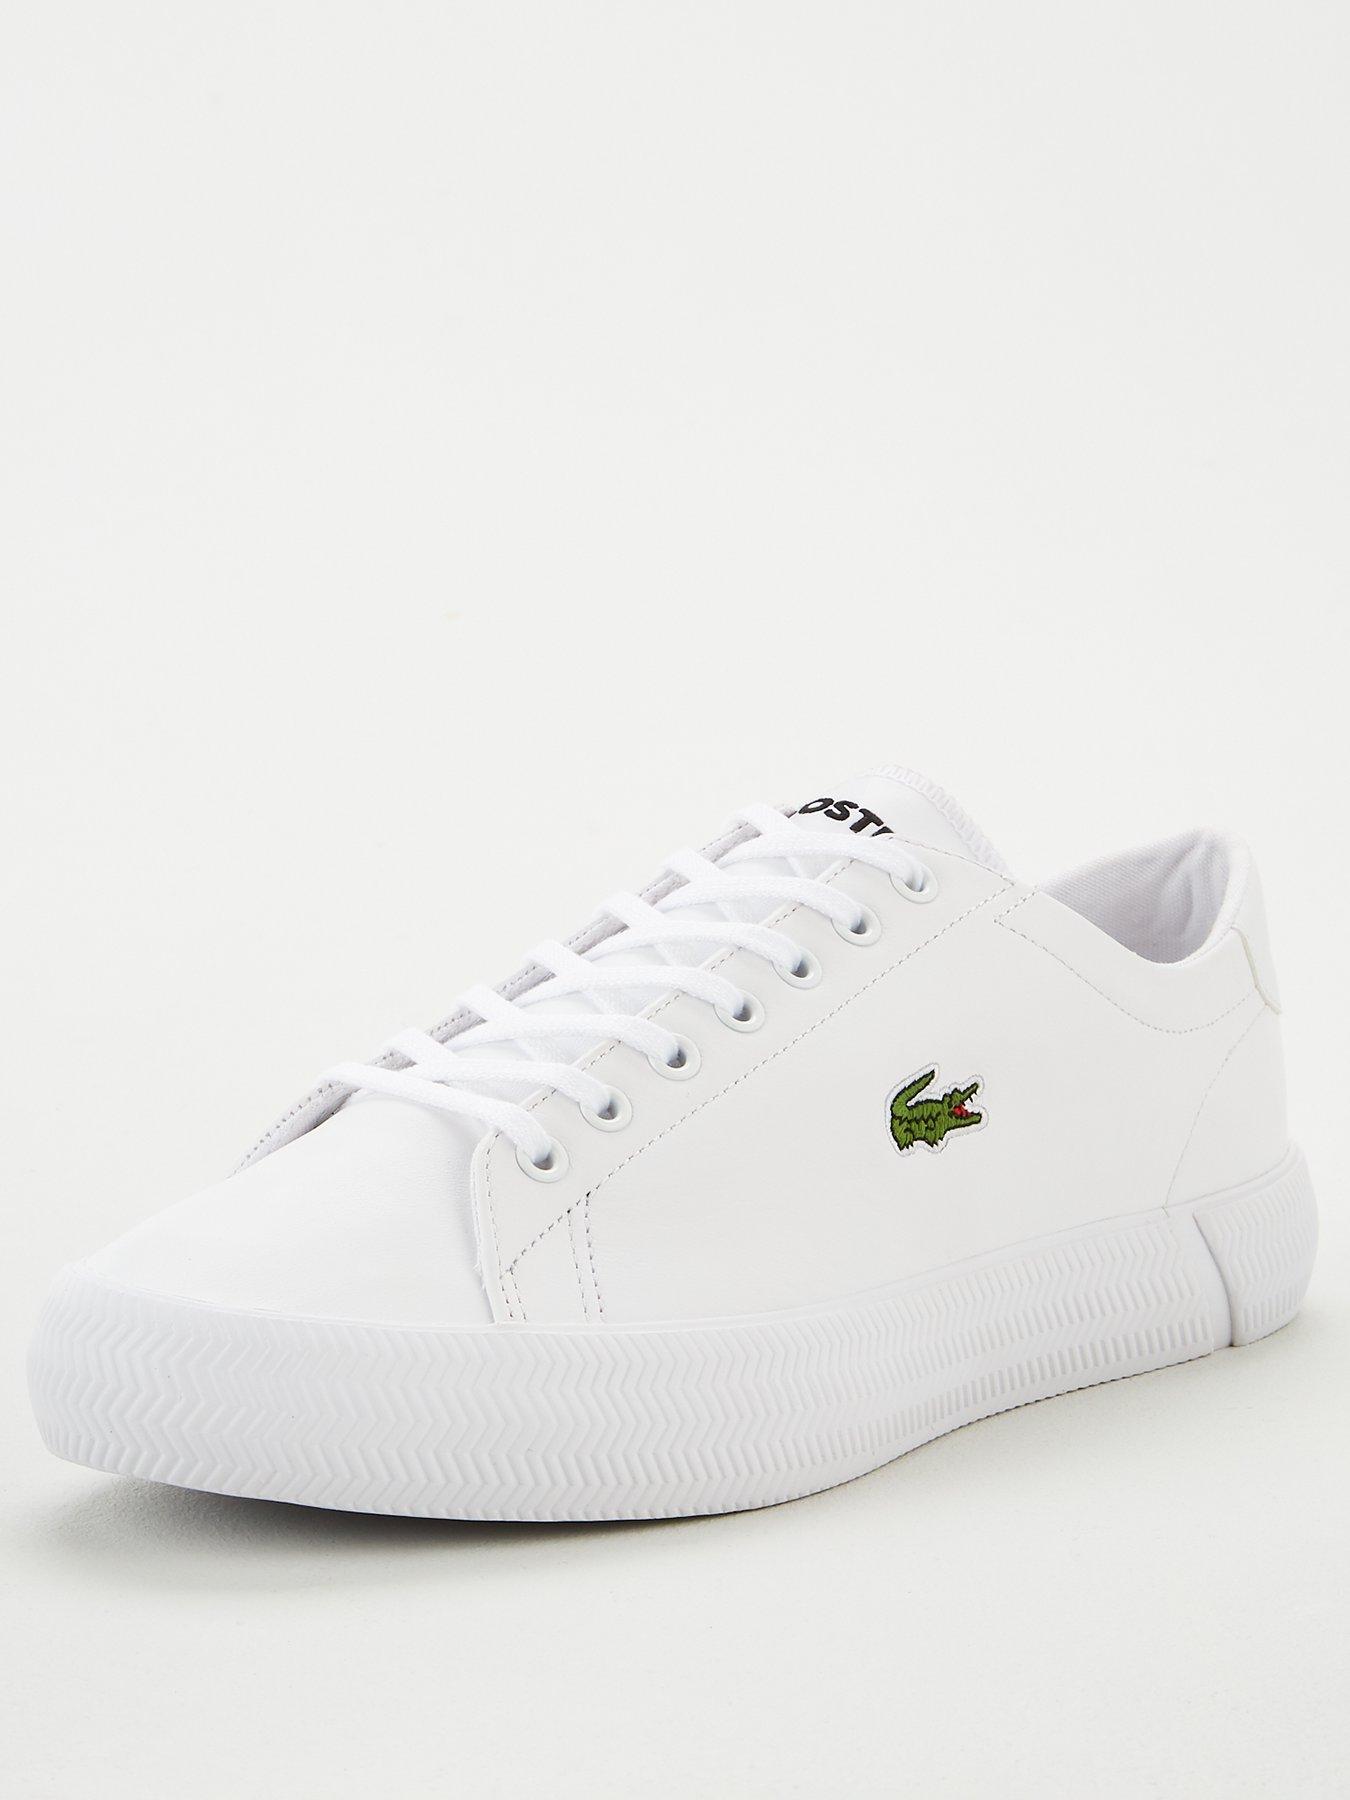 all white lacoste shoes